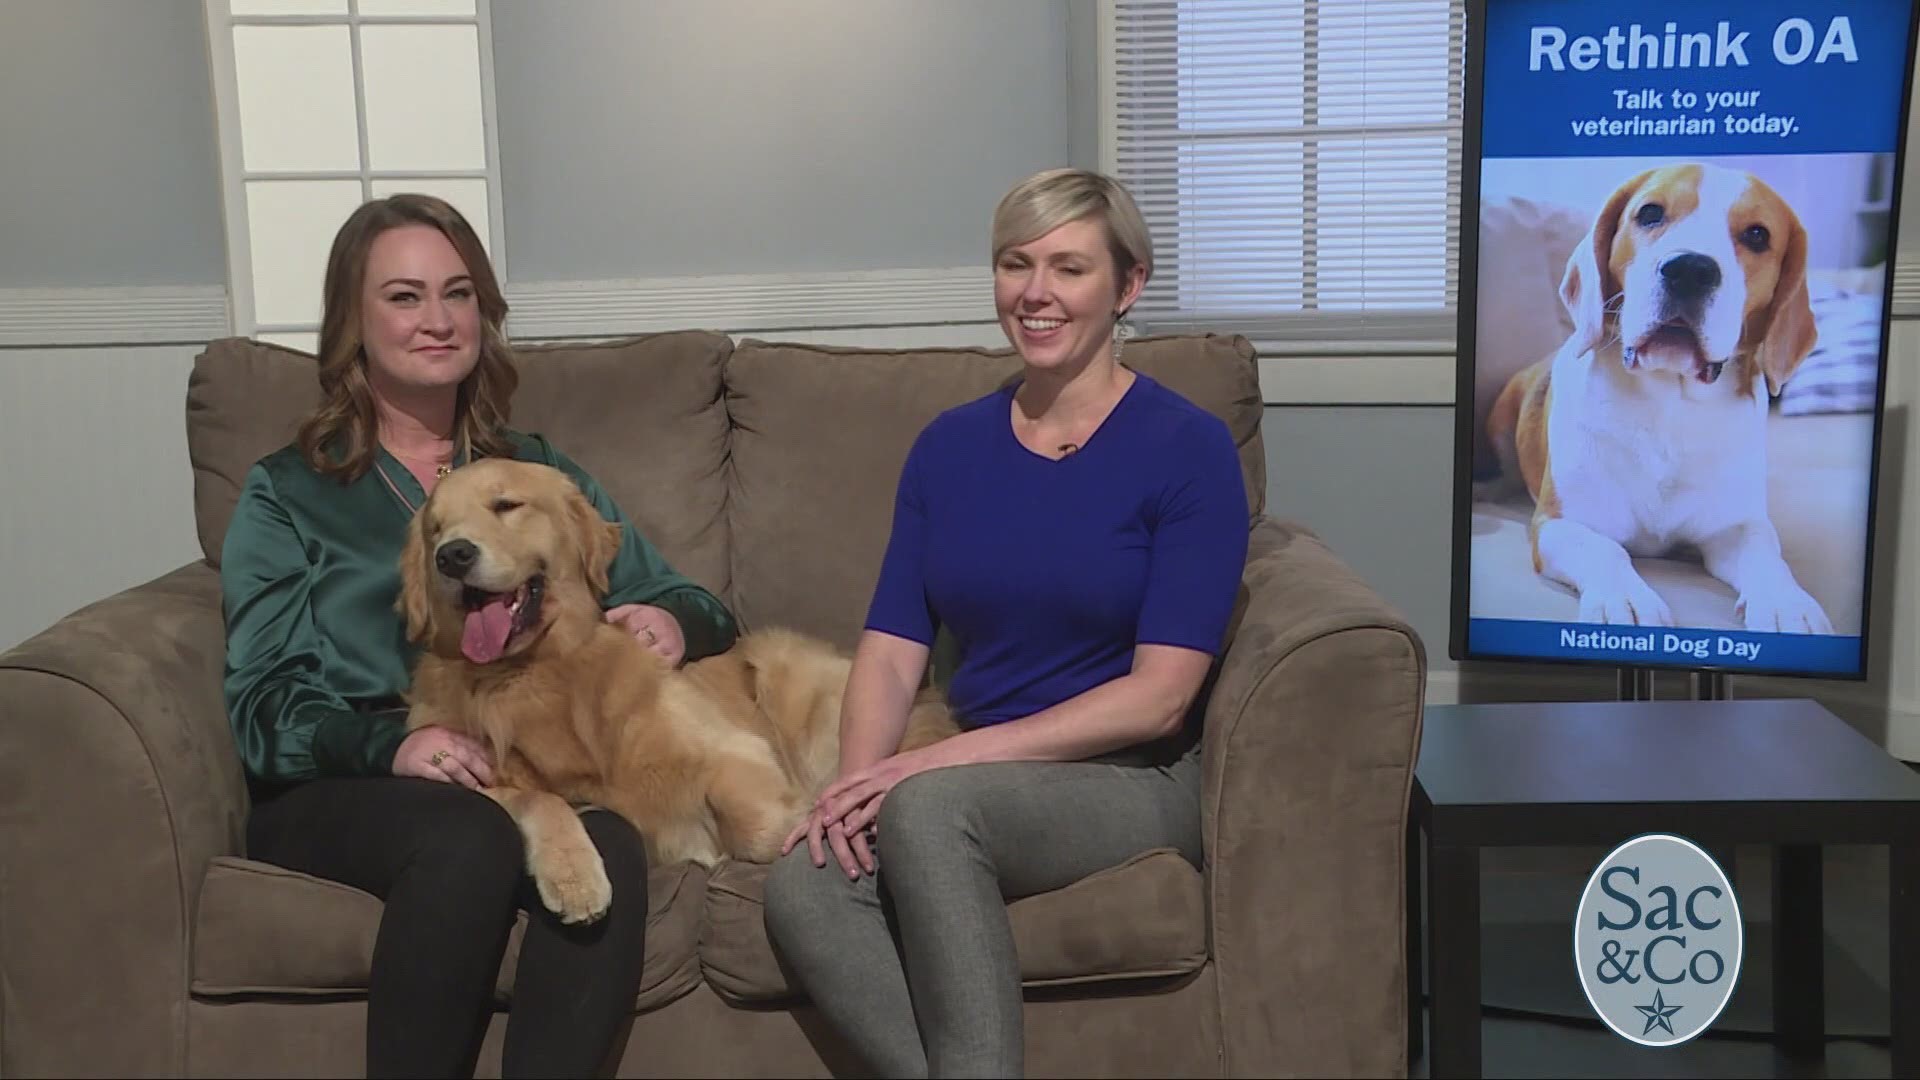 Canine osteoarthritis is the most common cause of chronic pain in dogs, and is estimated to affect approximately 20 percent of dogs over 1 year old. Small animal surgeon and rehabilitation specialist Kristin Kirby Shaw and territory manager for American Regent Animal Health, Meredith Kahn gave us some insight on how to better care for our four legged friends. The following is a paid segment sponsored by American Regent Animal Health.